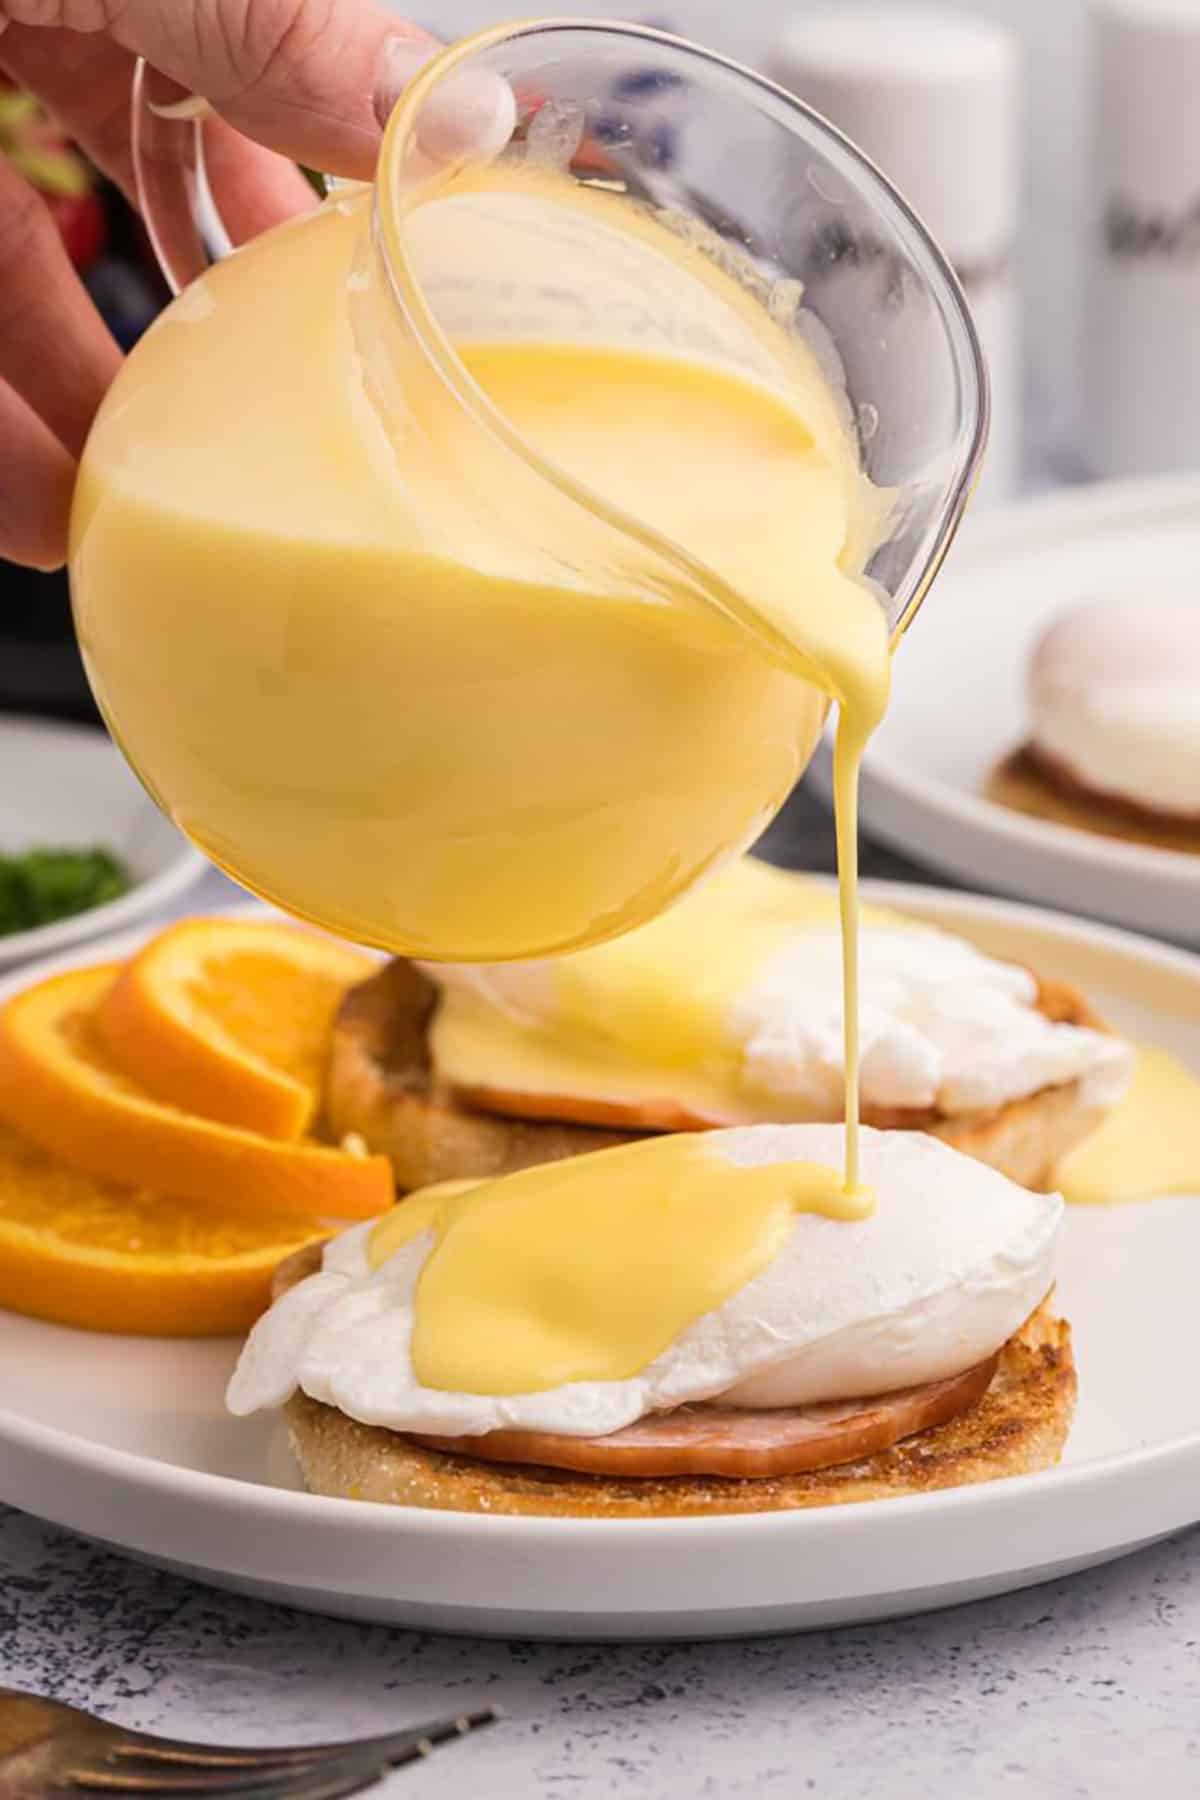 Hollandaise sauce is being poured over eggs benedict.